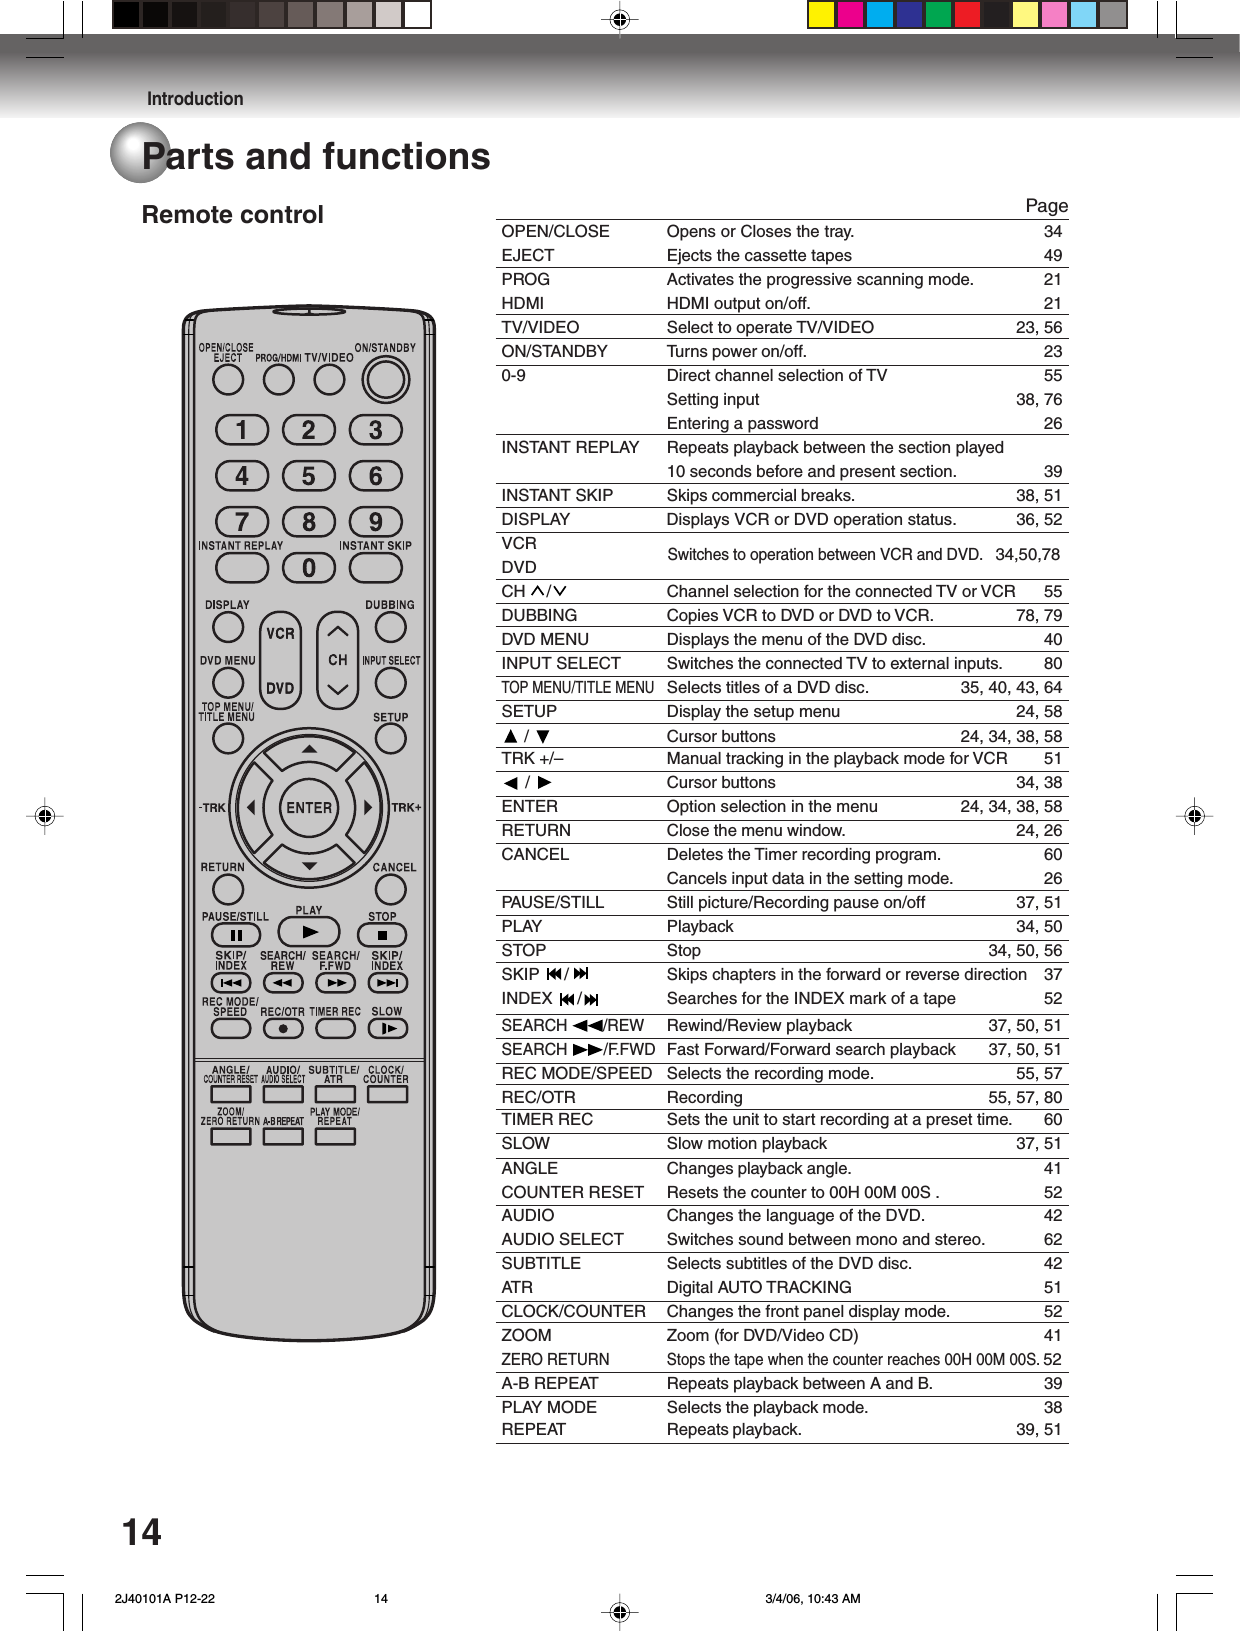 Introduction14OPEN/CLOSE Opens or Closes the tray. 34EJECT Ejects the cassette tapes 49PROG Activates the progressive scanning mode. 21HDMI HDMI output on/off. 21TV/VIDEO Select to operate TV/VIDEO 23, 56ON/STANDBY Turns power on/off. 230-9 Direct channel selection of TV 55Setting input 38, 76Entering a password 26INSTANT REPLAY Repeats playback between the section played10 seconds before and present section. 39INSTANT SKIP Skips commercial breaks. 38, 51DISPLAY Displays VCR or DVD operation status. 36, 52VCRDVDCH  / Channel selection for the connected TV or VCR 55DUBBING Copies VCR to DVD or DVD to VCR. 78, 79DVD MENU Displays the menu of the DVD disc. 40INPUT SELECT Switches the connected TV to external inputs. 80TOP MENU/TITLE MENUSelects titles of a DVD disc. 35, 40, 43, 64SETUP Display the setup menu 24, 58 /  Cursor buttons 24, 34, 38, 58TRK +/– Manual tracking in the playback mode for VCR 51 /  Cursor buttons 34, 38ENTER Option selection in the menu 24, 34, 38, 58RETURN Close the menu window. 24, 26CANCEL Deletes the Timer recording program. 60Cancels input data in the setting mode. 26PAUSE/STILL Still picture/Recording pause on/off 37, 51PLAY Playback 34, 50STOP Stop 34, 50, 56SKIP  / Skips chapters in the forward or reverse direction 37INDEX  / Searches for the INDEX mark of a tape 52SEARCH  /REWRewind/Review playback 37, 50, 51SEARCH  /F.FWDFast Forward/Forward search playback 37, 50, 51REC MODE/SPEED Selects the recording mode. 55, 57REC/OTR Recording 55, 57, 80TIMER REC Sets the unit to start recording at a preset time. 60SLOW Slow motion playback  37, 51ANGLE Changes playback angle. 41COUNTER RESET Resets the counter to 00H 00M 00S . 52AUDIO Changes the language of the DVD. 42AUDIO SELECT Switches sound between mono and stereo. 62SUBTITLE Selects subtitles of the DVD disc. 42ATR Digital AUTO TRACKING 51CLOCK/COUNTER Changes the front panel display mode. 52ZOOM Zoom (for DVD/Video CD) 41ZERO RETURN Stops the tape when the counter reaches 00H 00M 00S. 52A-B REPEAT Repeats playback between A and B. 39PLAY MODE Selects the playback mode. 38REPEAT Repeats playback. 39, 51Remote control PageParts and functionsSwitches to operation between VCR and DVD.34,50,78 2J40101A P12-22 3/4/06, 10:43 AM14